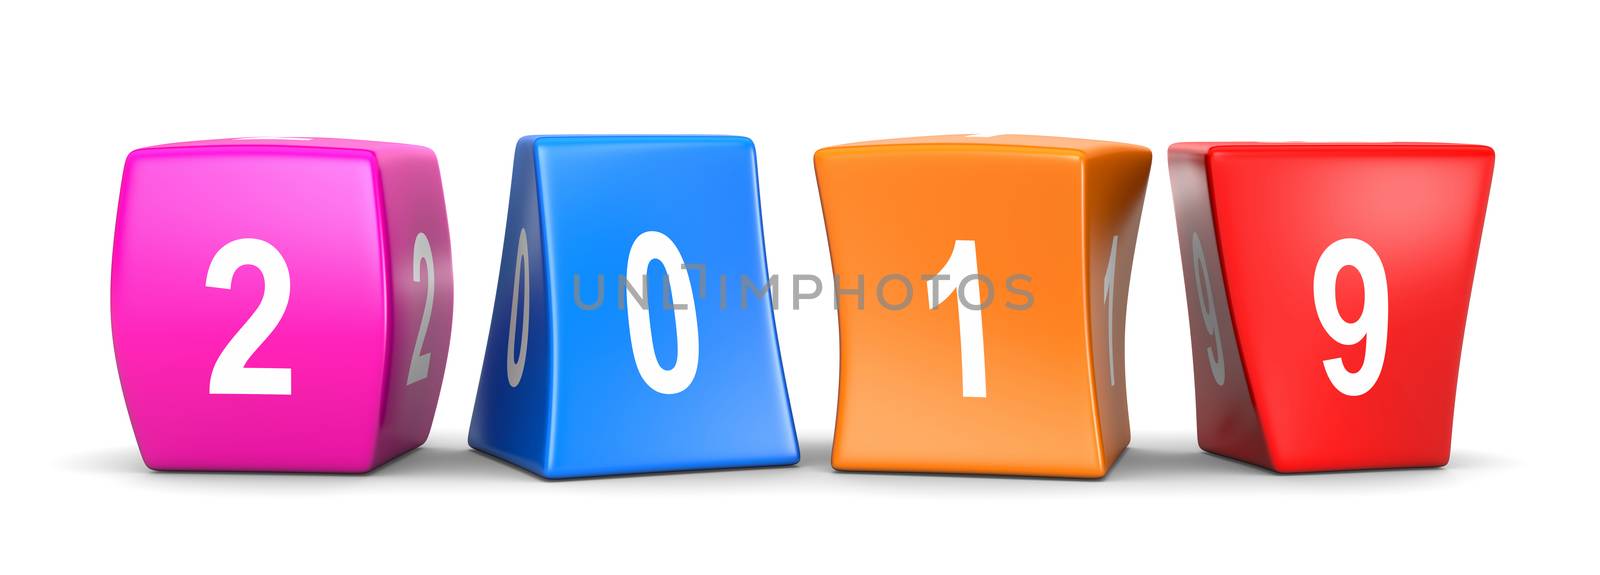 2019 White Text on Colorful Deformed Funny Cubes 3D Illustration on White Background